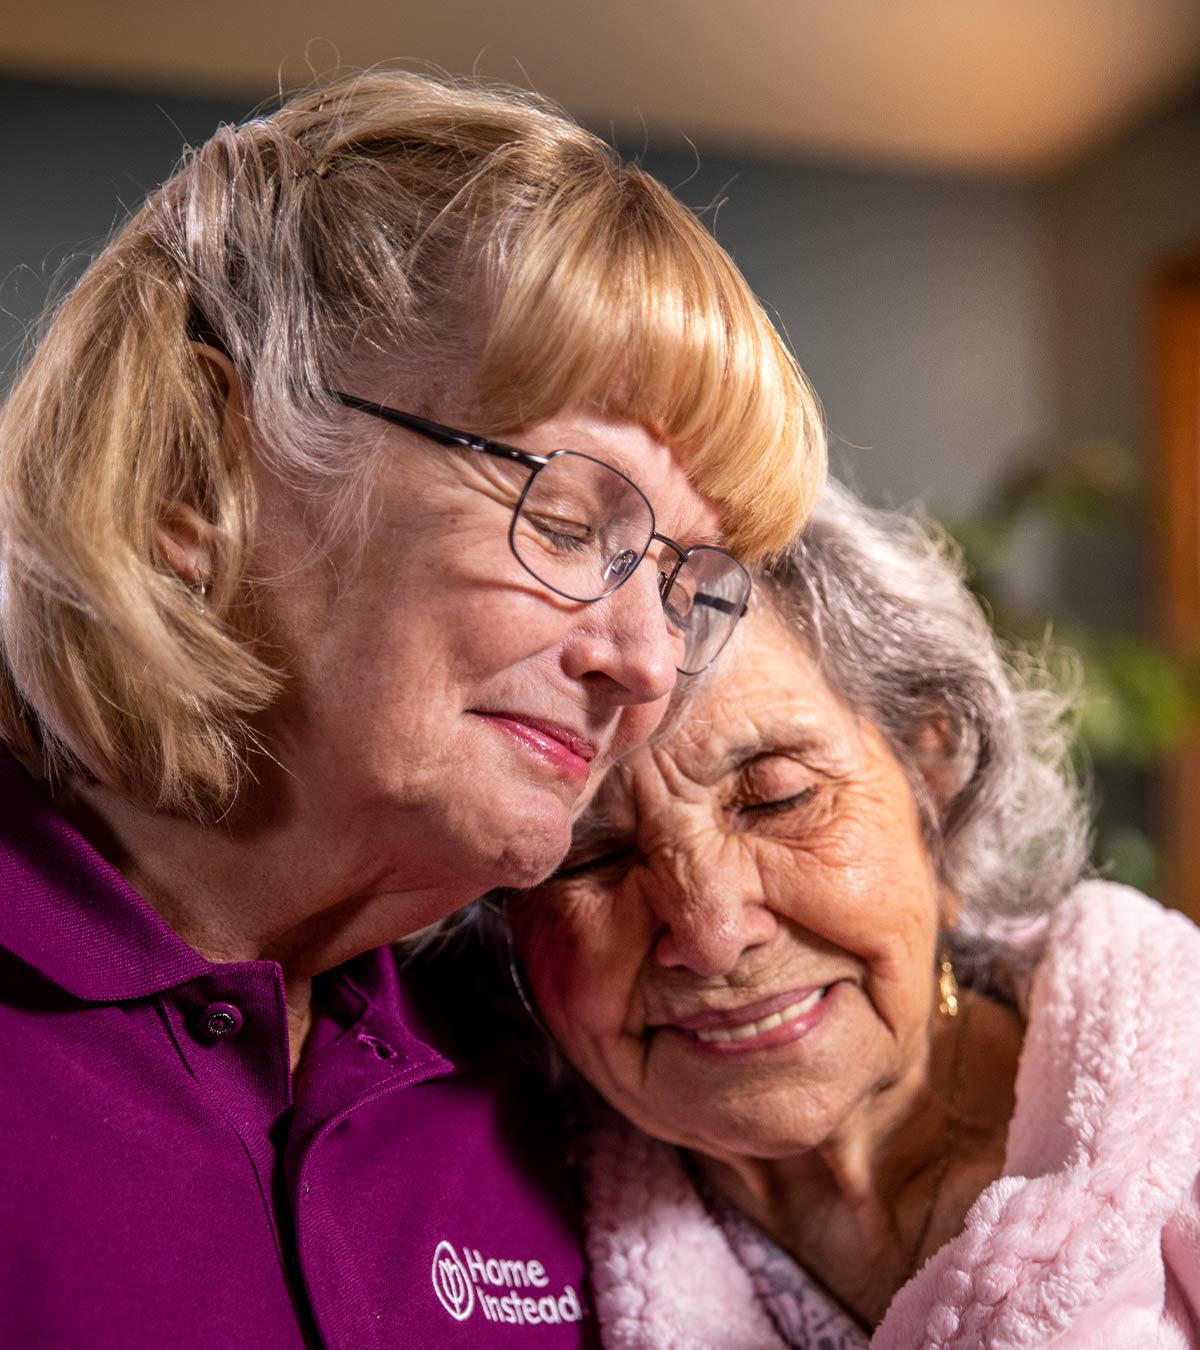 CAREGiver providing in-home senior care services. Home Instead of Skokie, IL provides Elder Care to aging adults. 